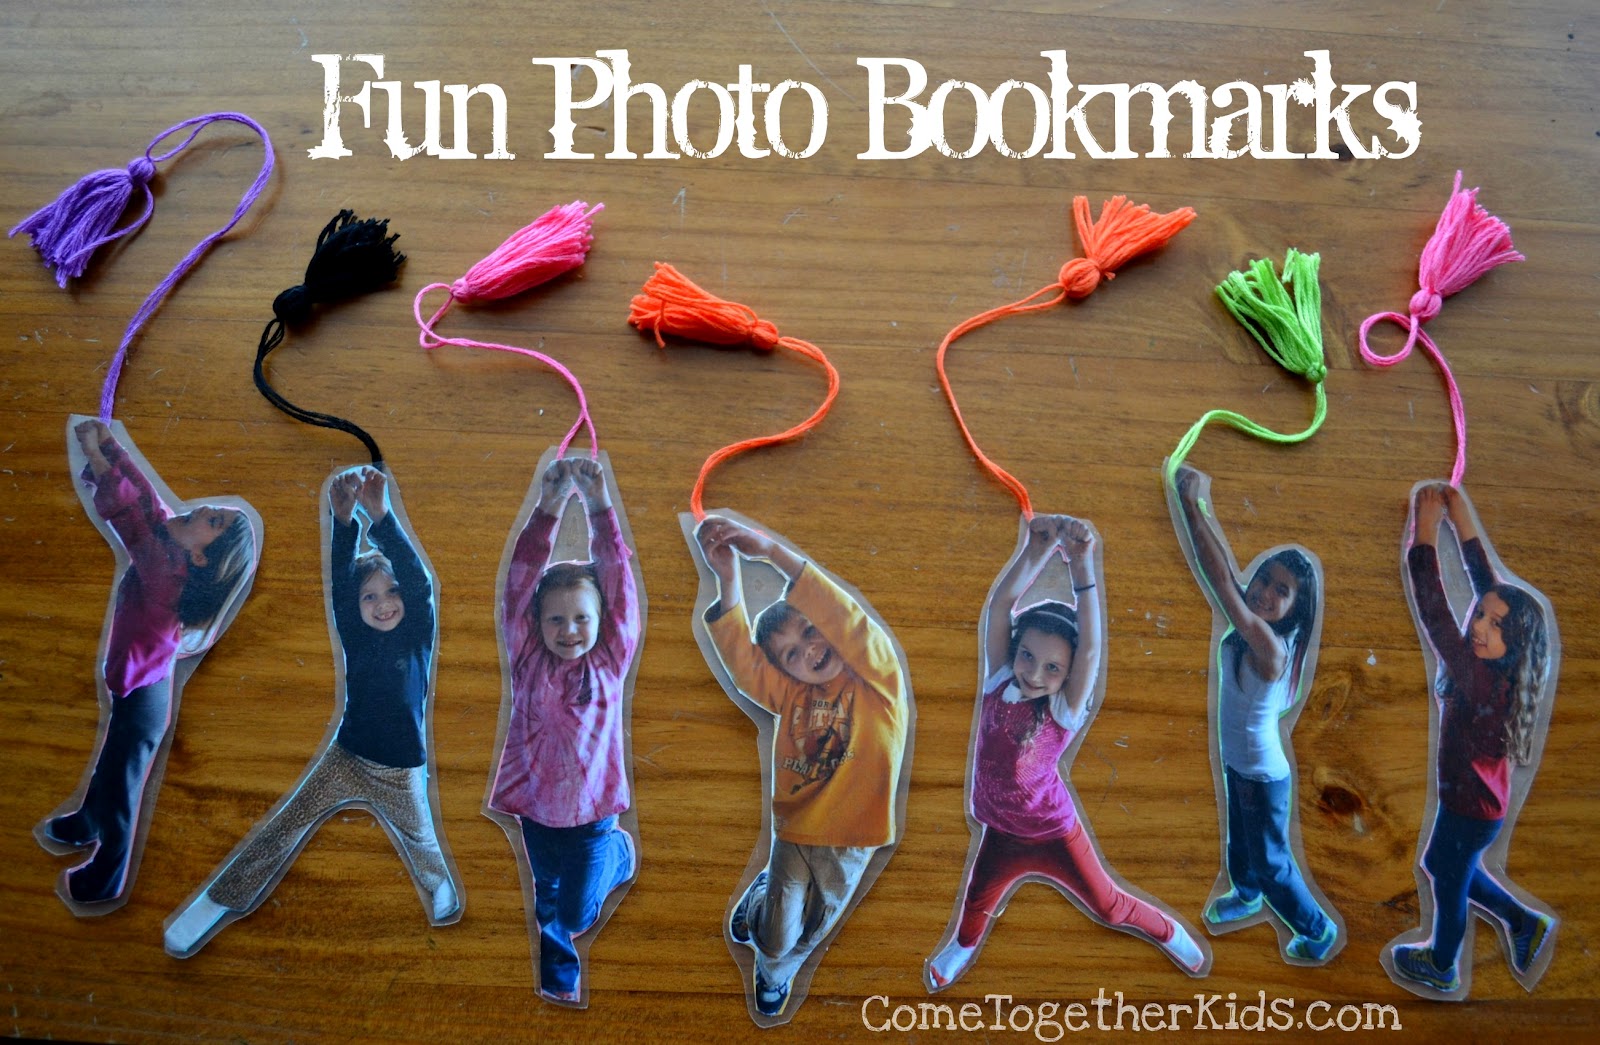 Bookmarks are made from photos of kids with their arms oustretched. Tassels are attached to the top.